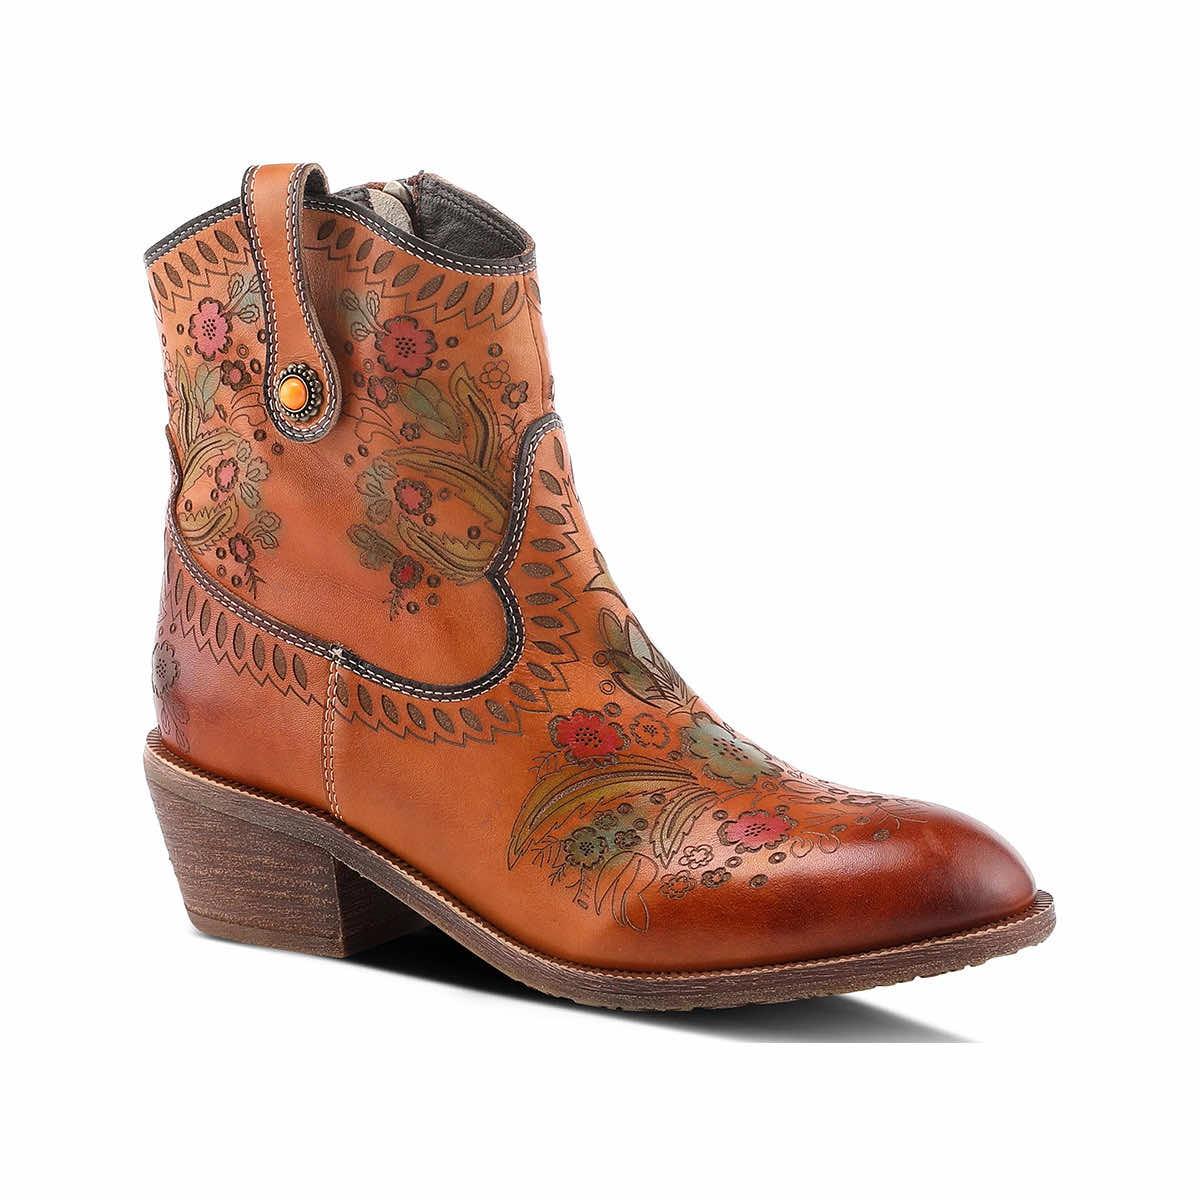 Mast General Store | Women's Galop Boots